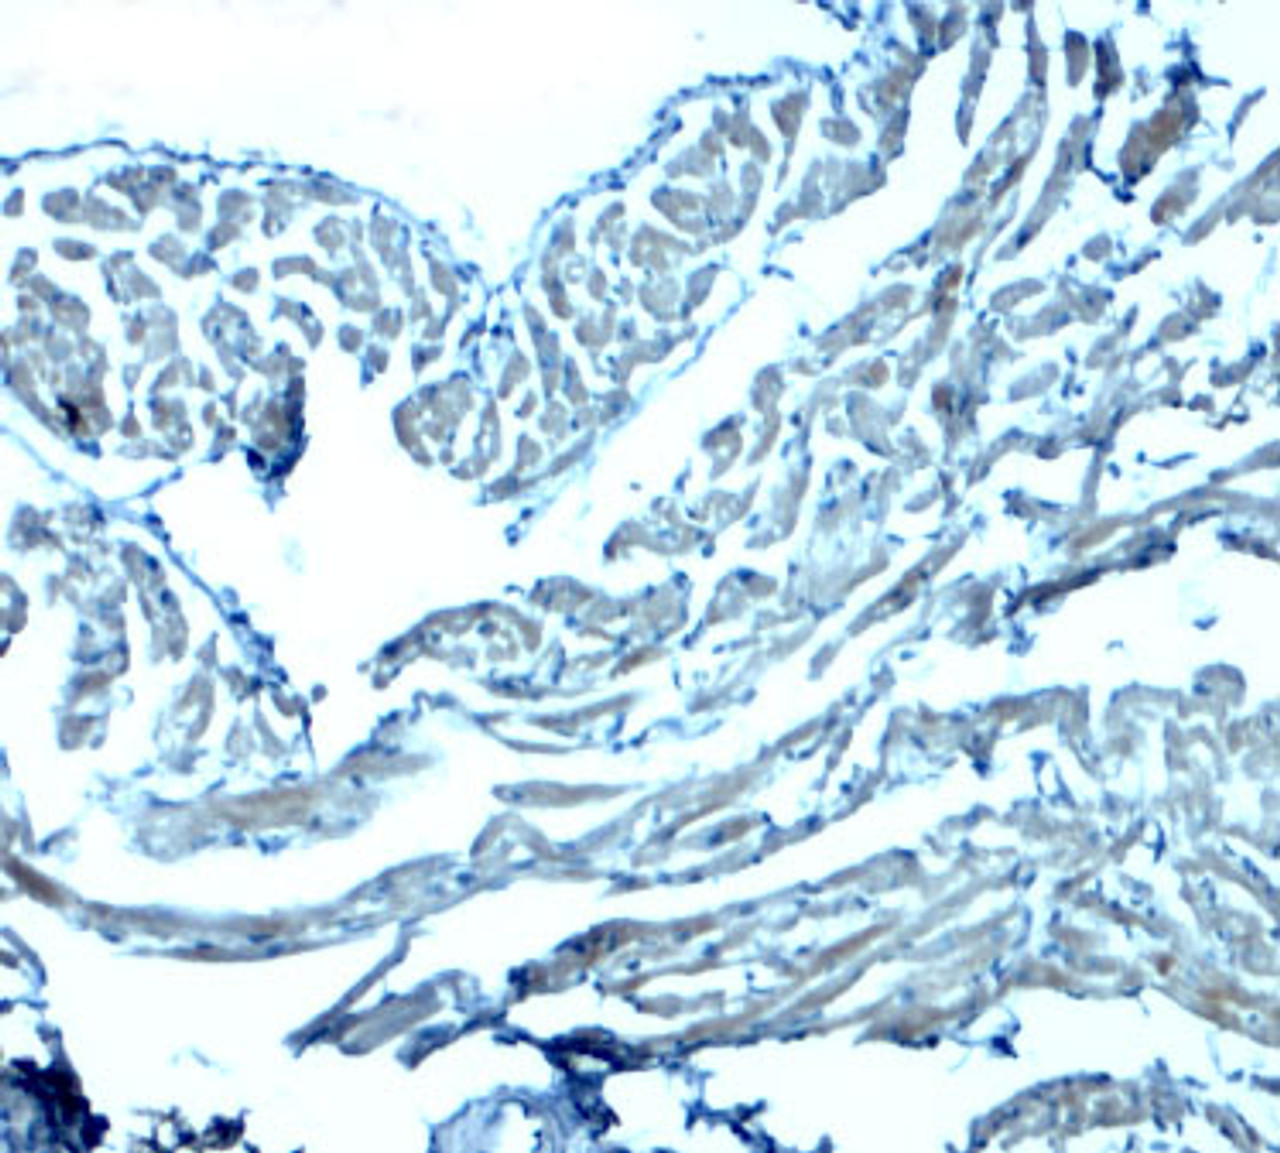 Immunohistochemistry of GAS6 in mouse heart tissue with GAS6 antibody at 2.5 ug/mL.